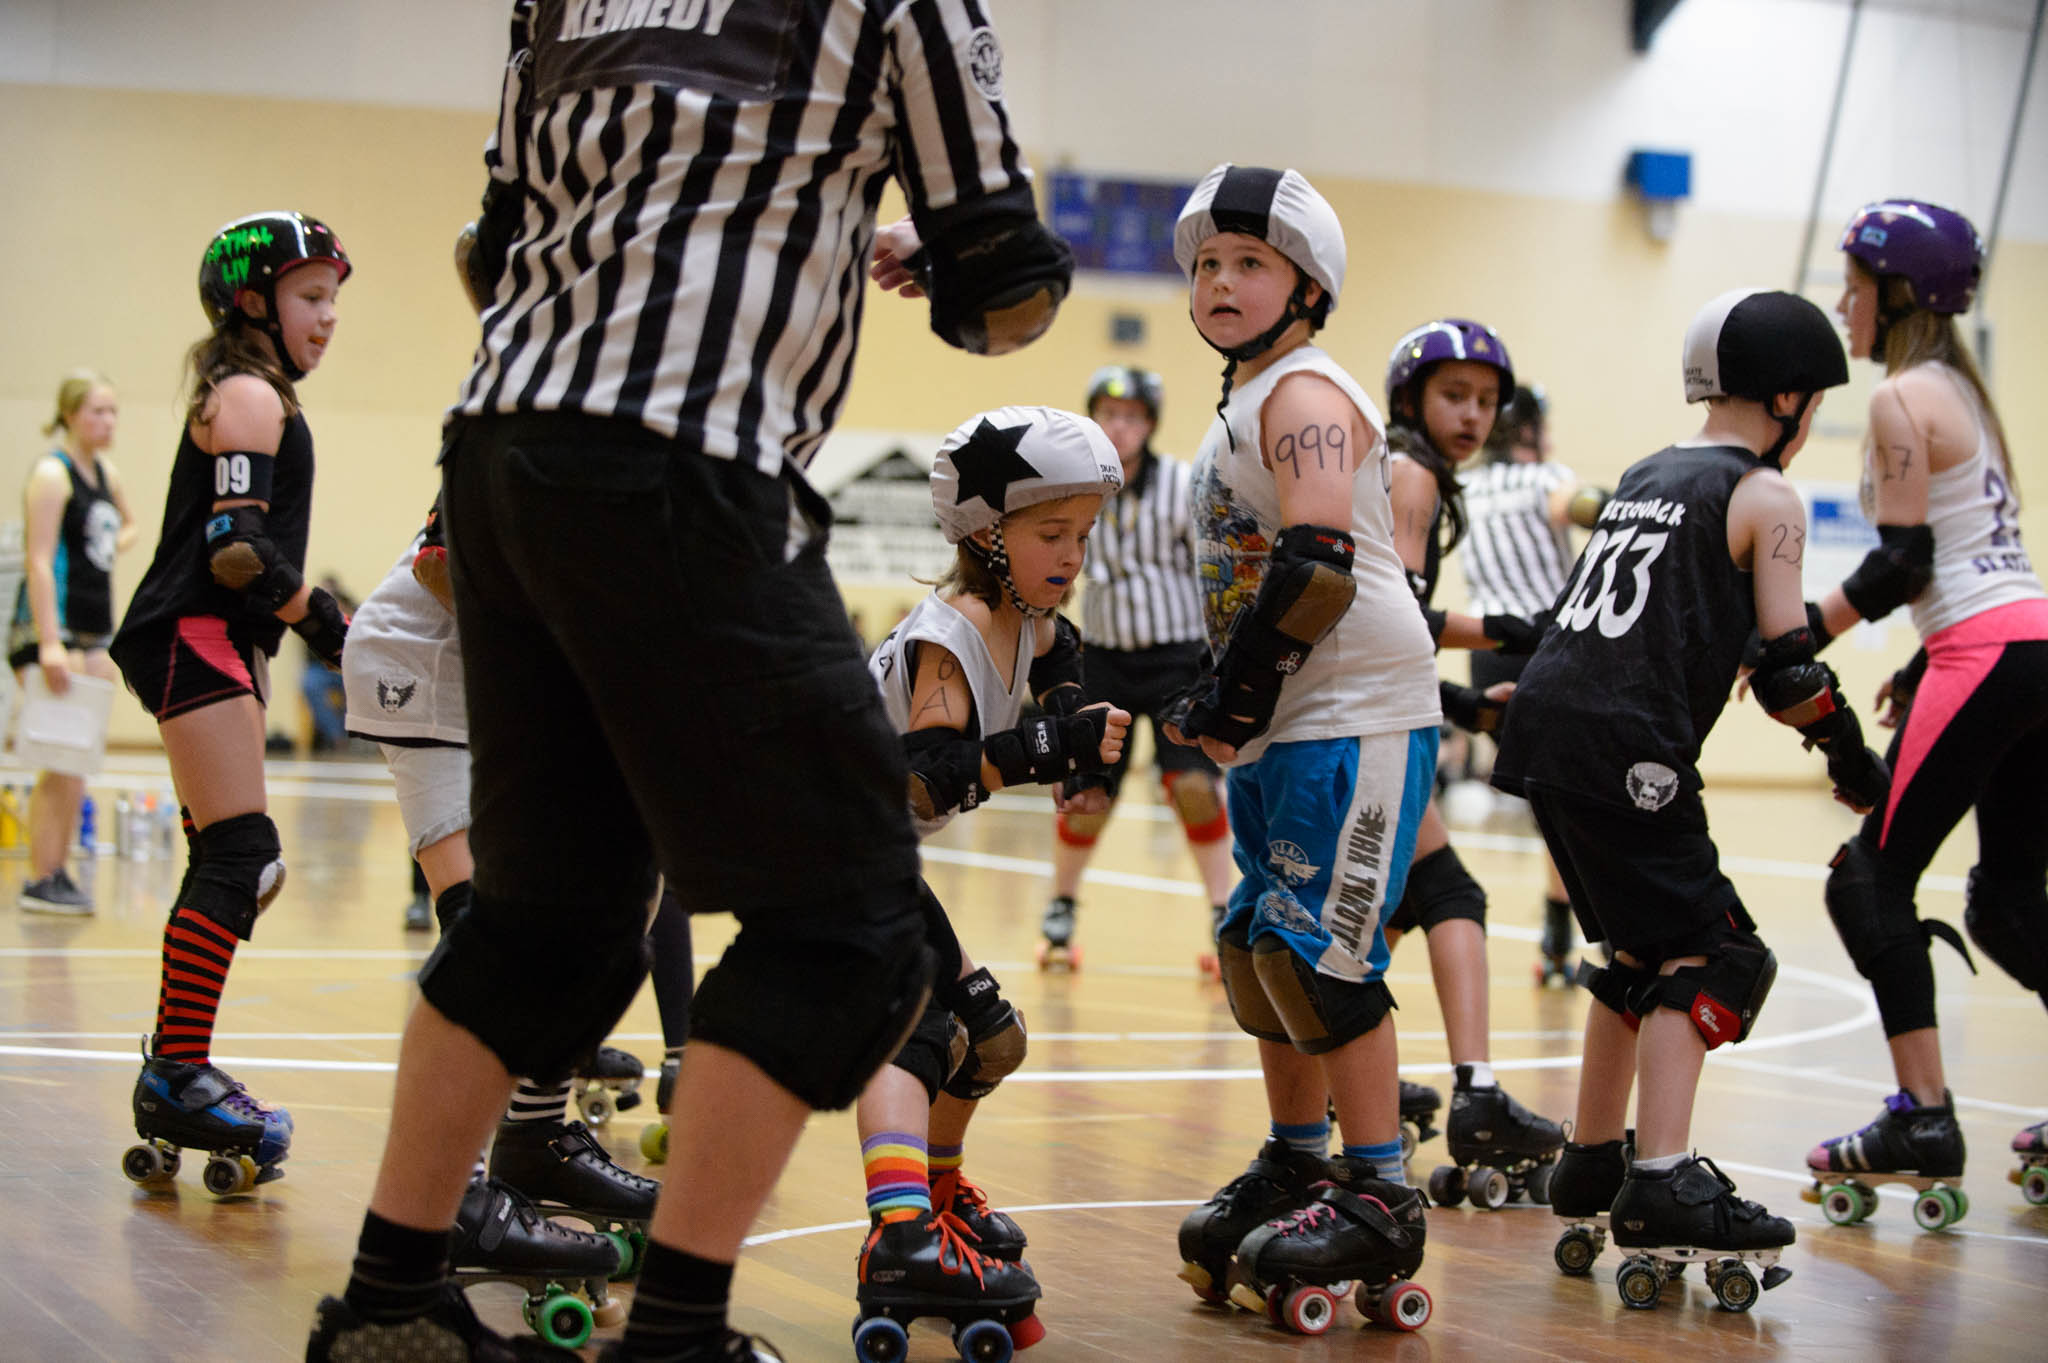 Capital Stampede - Outback v City Slickers, Photographer: Brett Sargeant, D-eye Photography